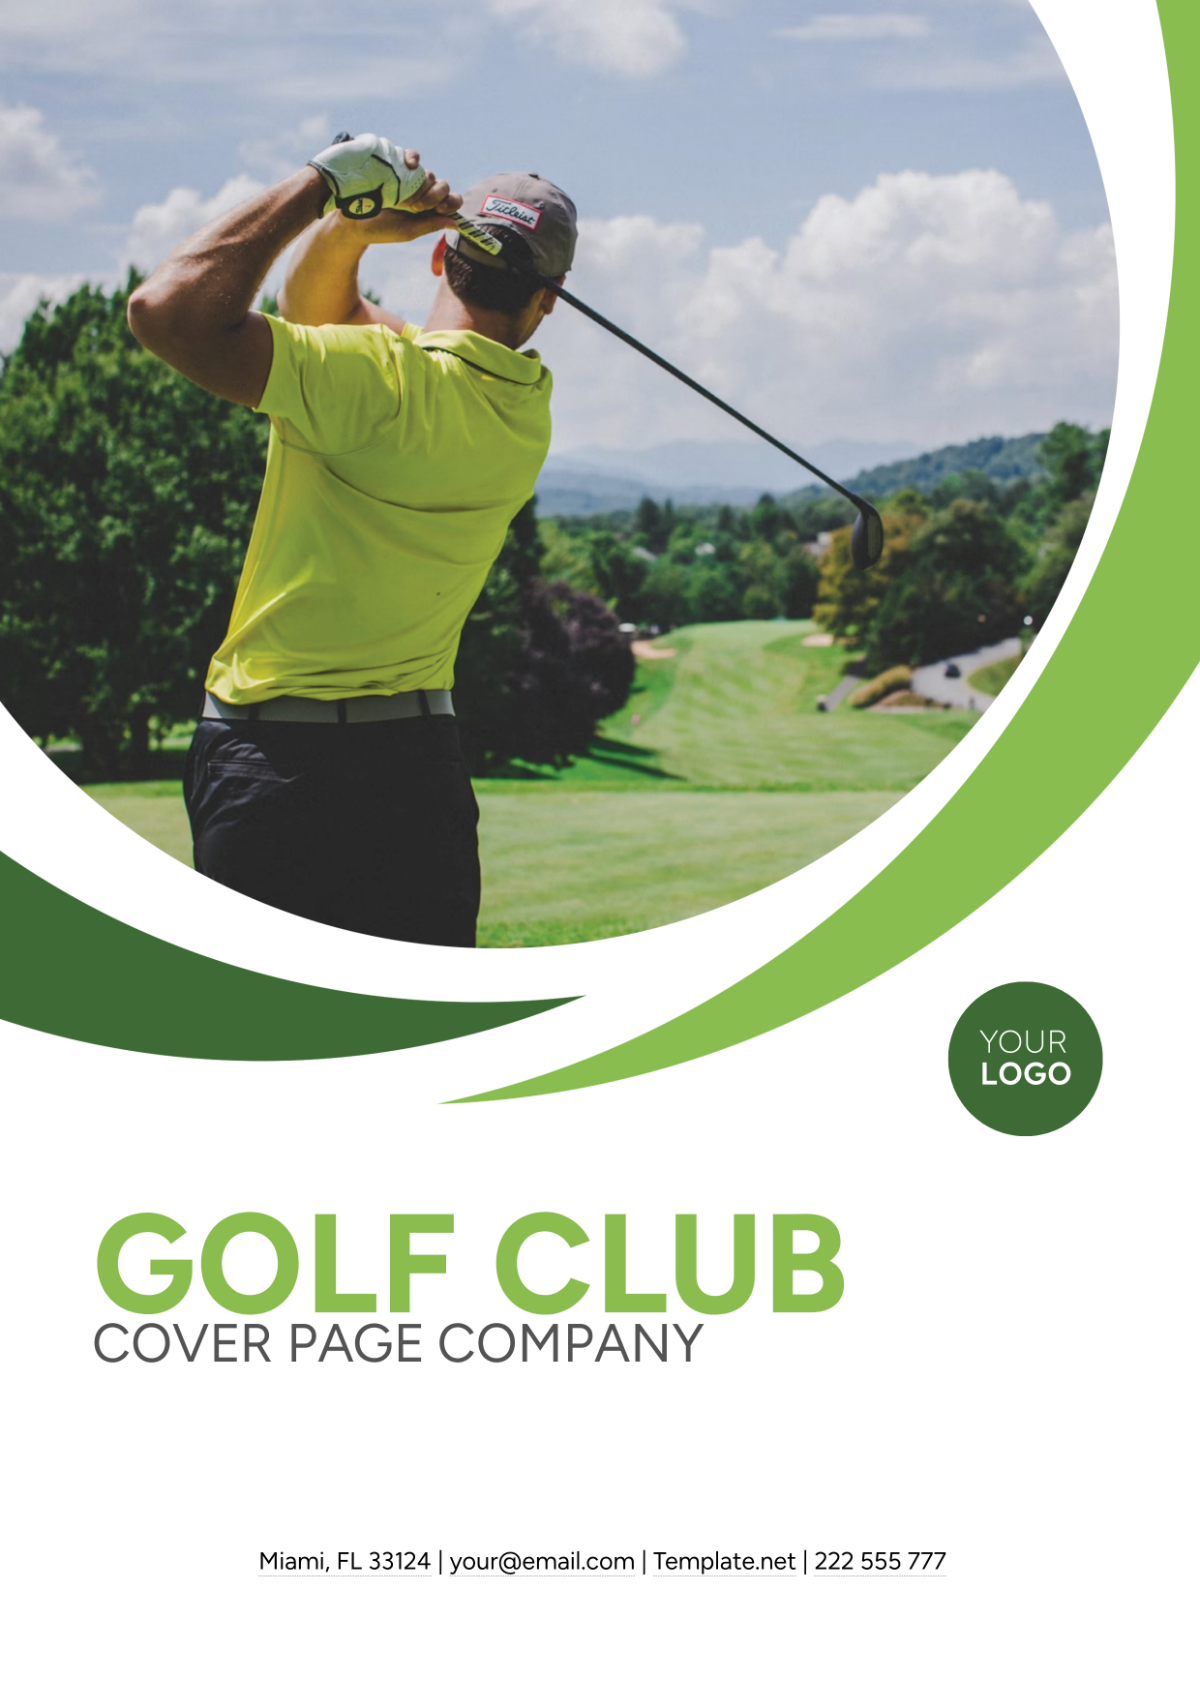 Golf Club Cover Page Company